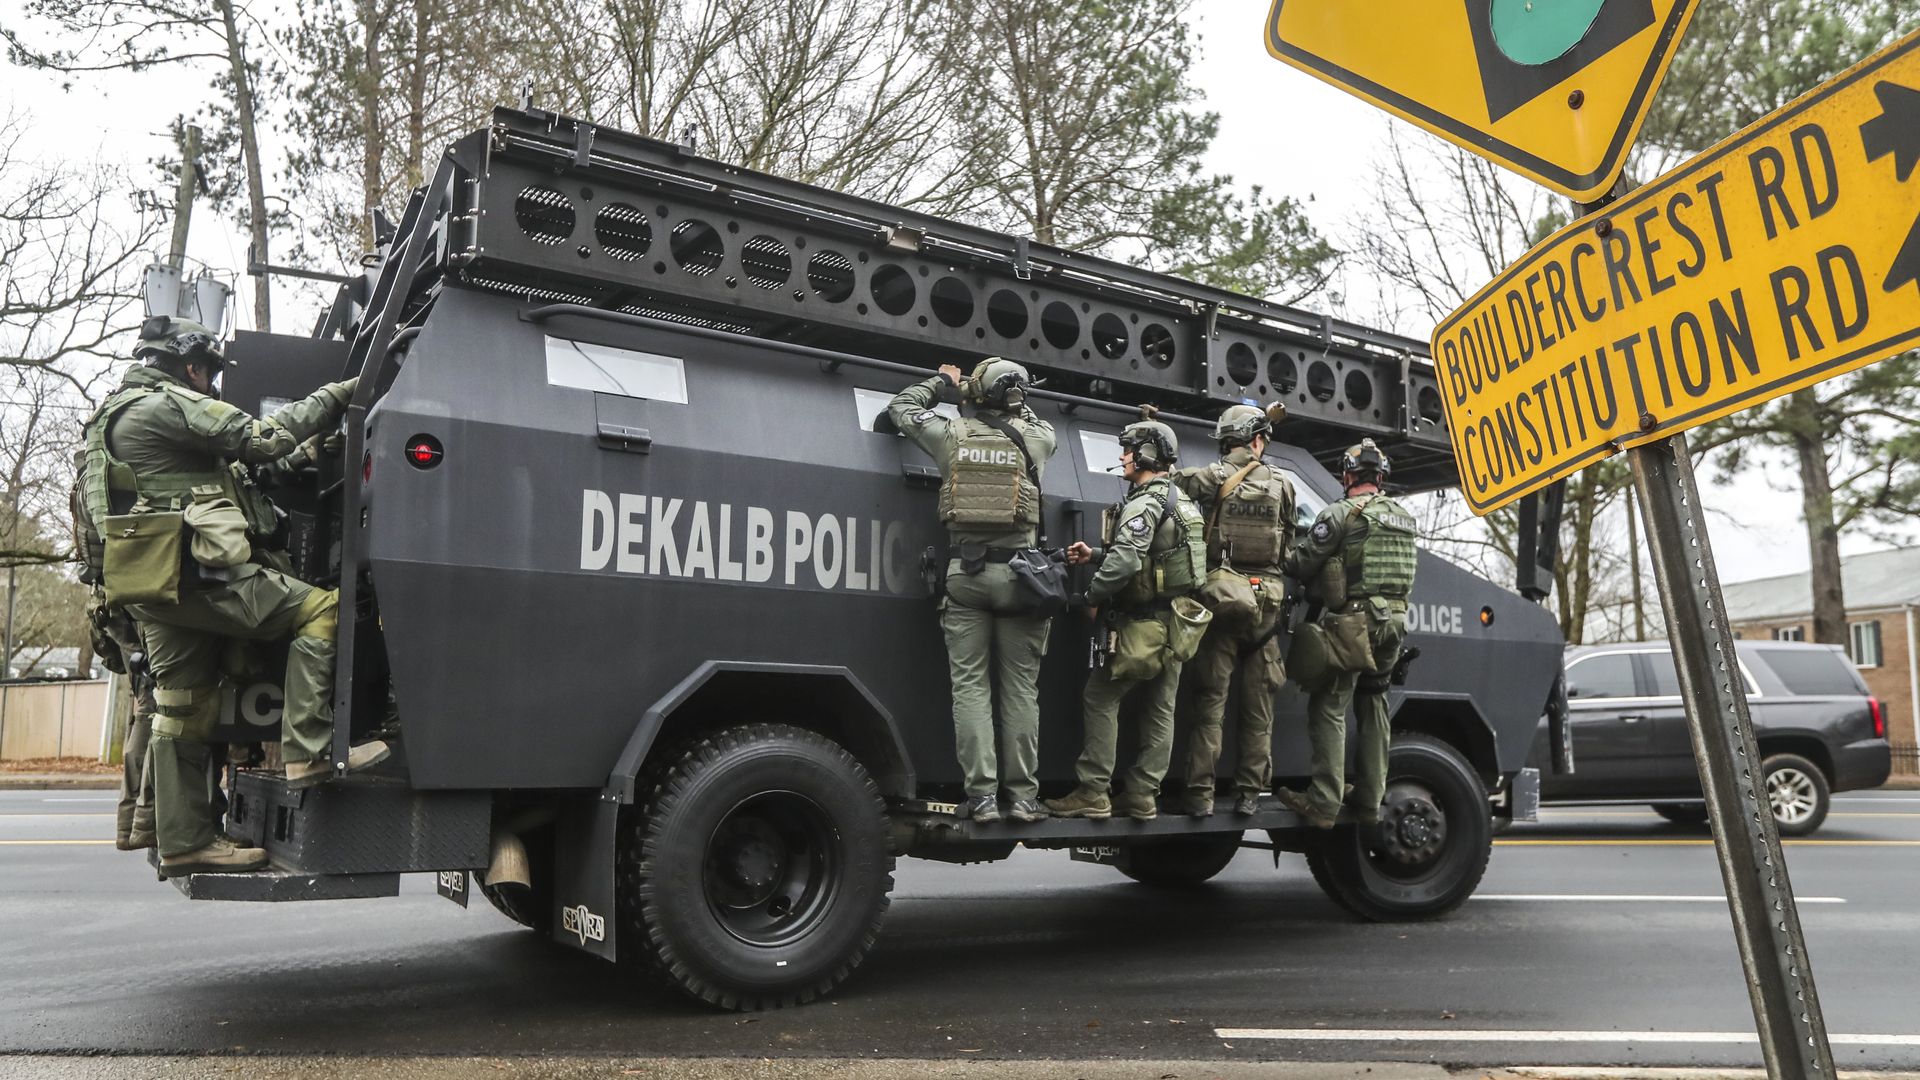 Police officers in tactical and protective gear hang on to the side of a SWAT truck